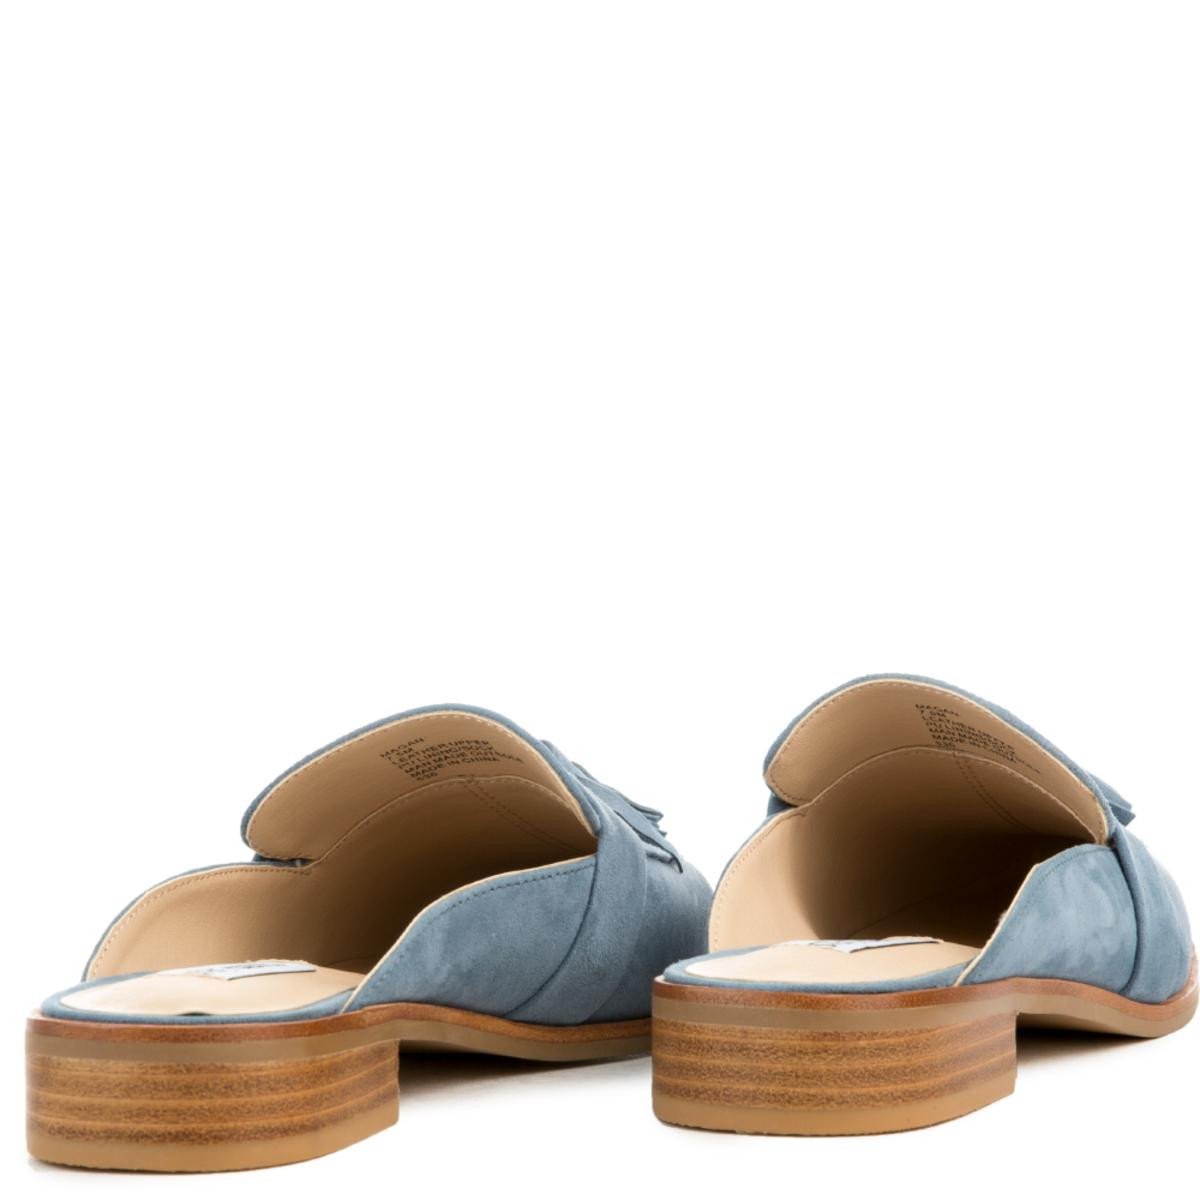 Stave Madden for Women: MAGAN BLUE SUEDE